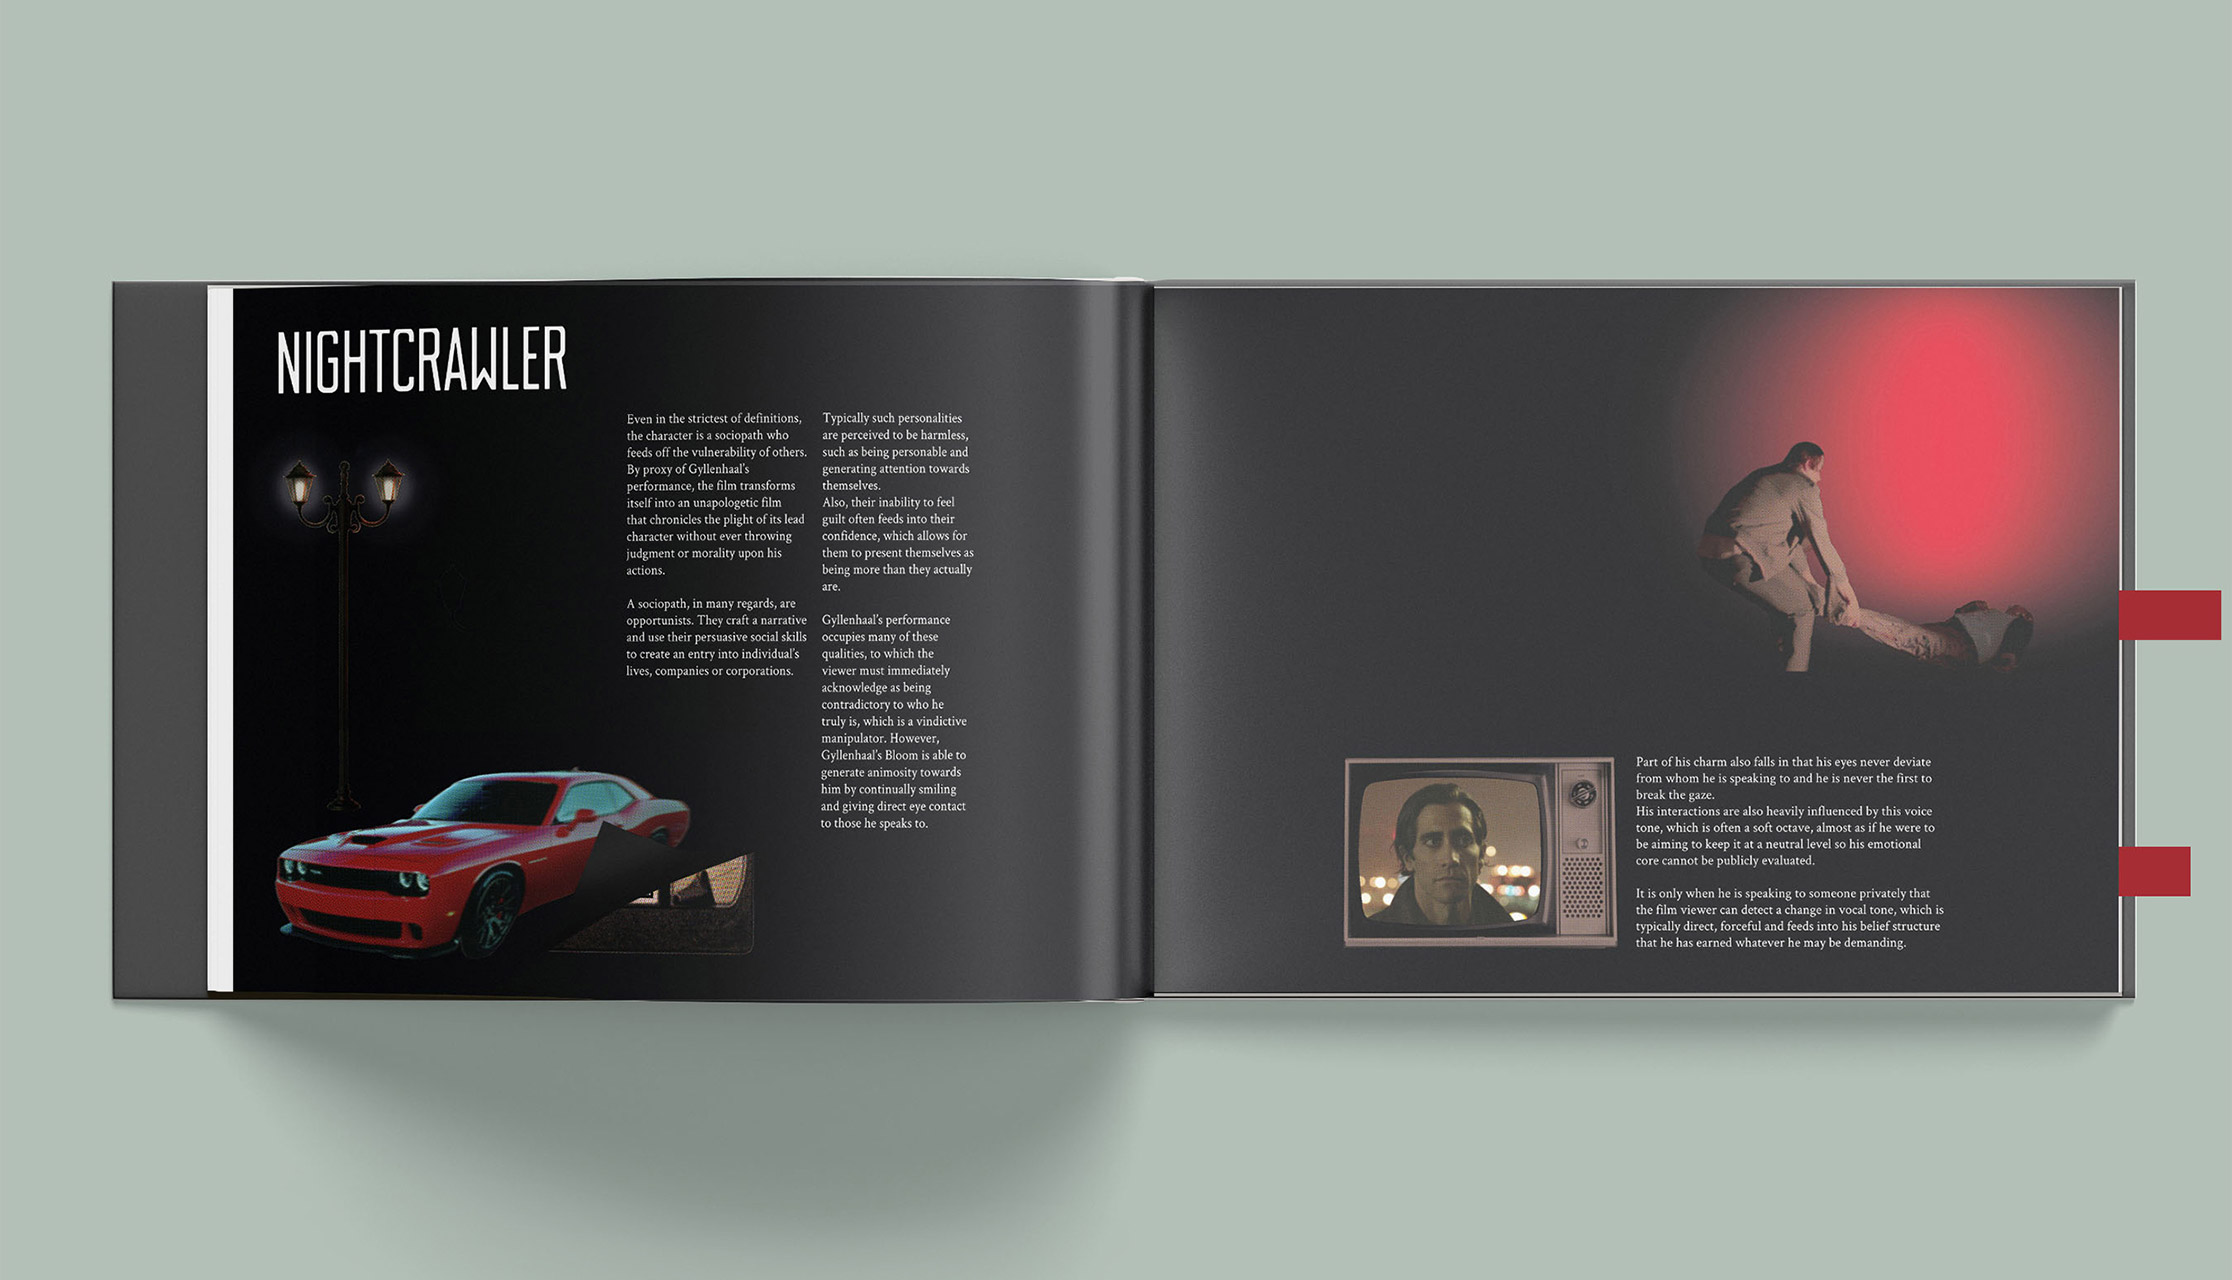 Mock-up of interactive spread for the film, Nightcrawler